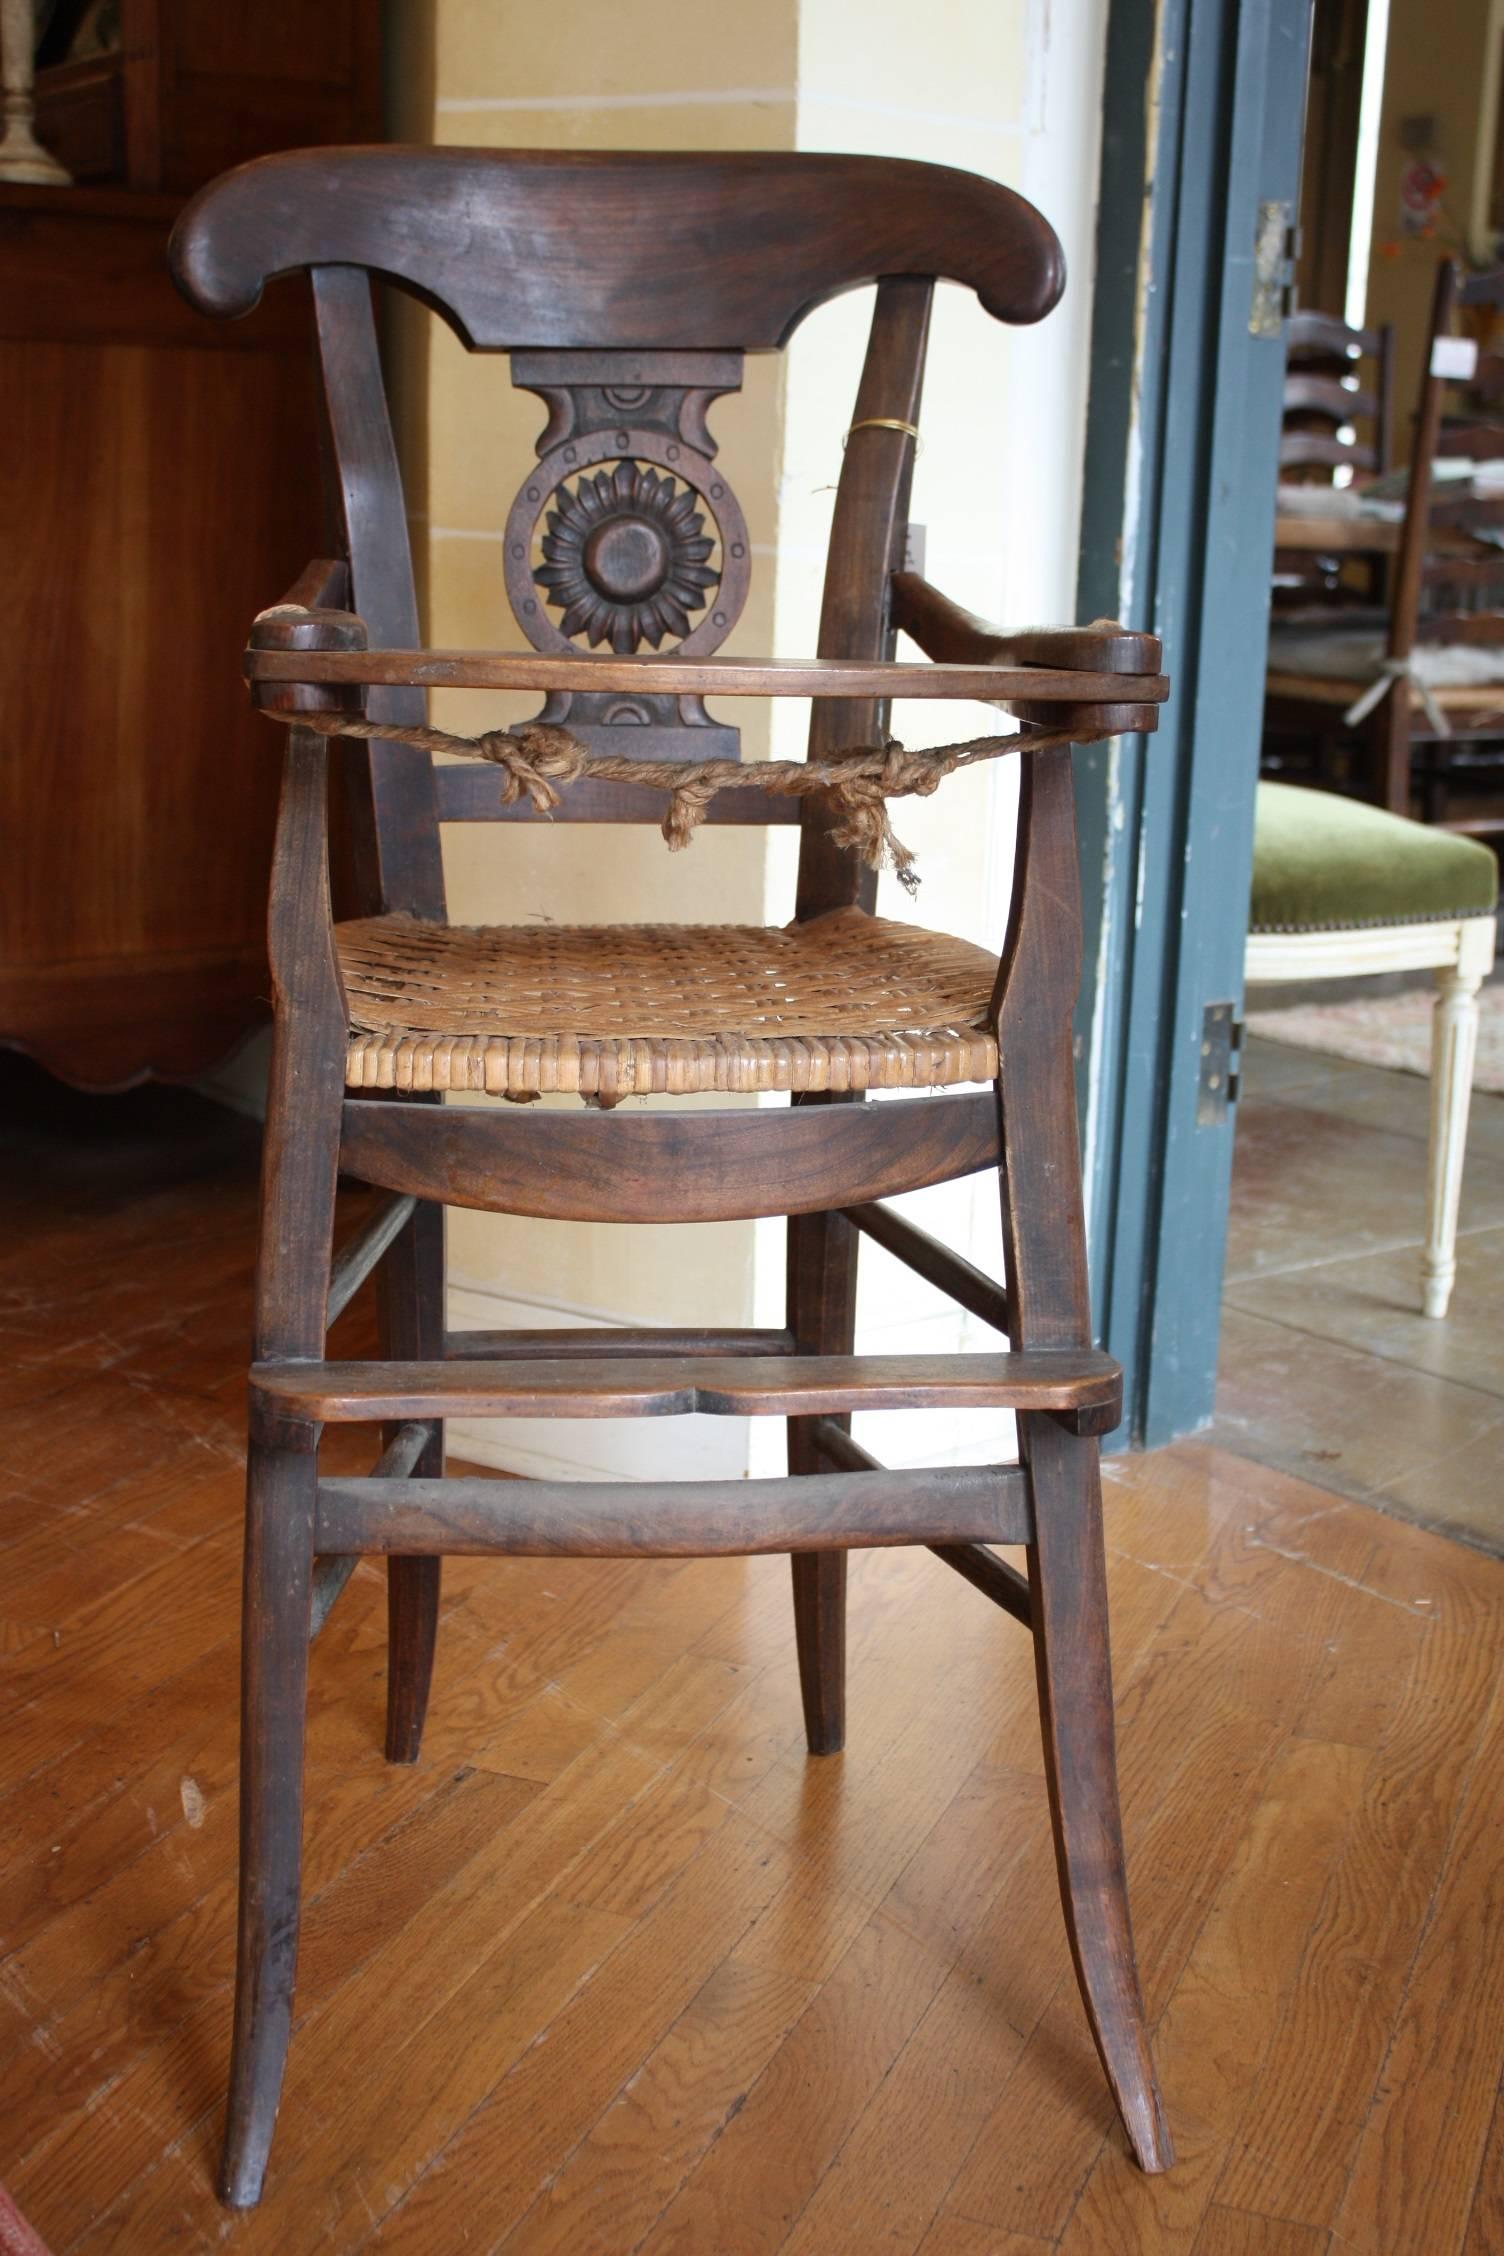 French antique high chair / youth chair with rush seat.